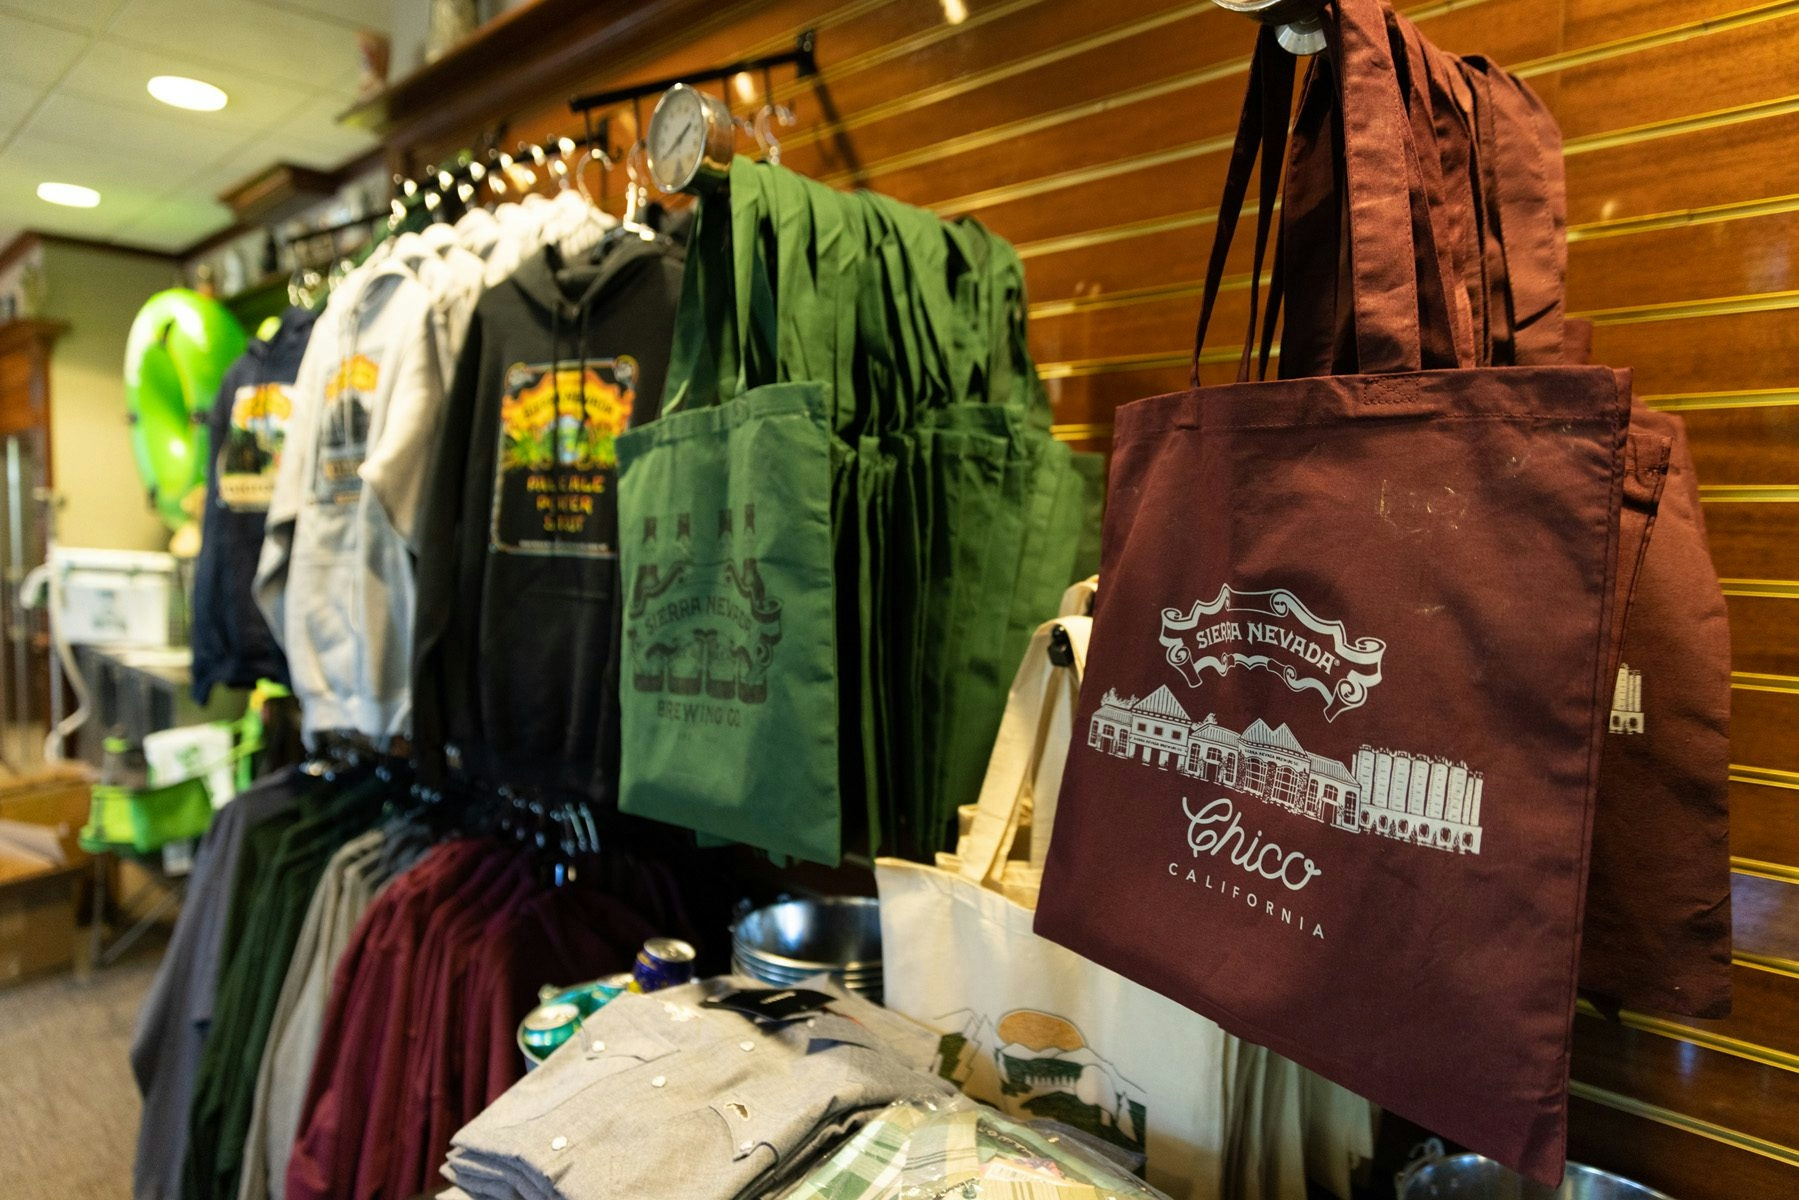 Tote bags and other merch inside the Sierra Nevada Brewing Co. gift shift in Chico, California